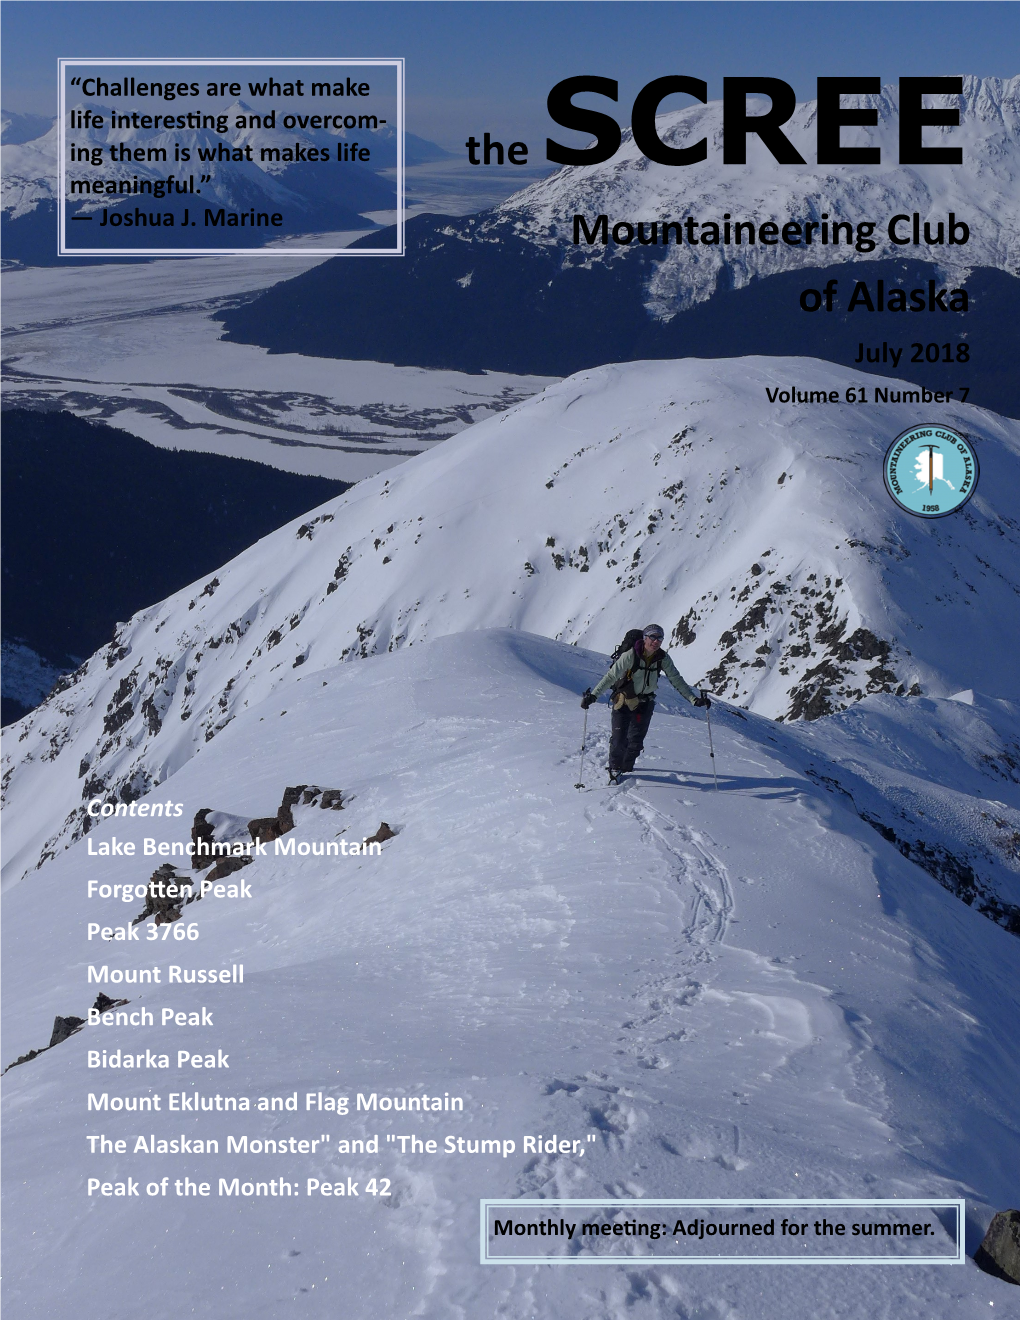 The SCREE Mountaineering Club Of